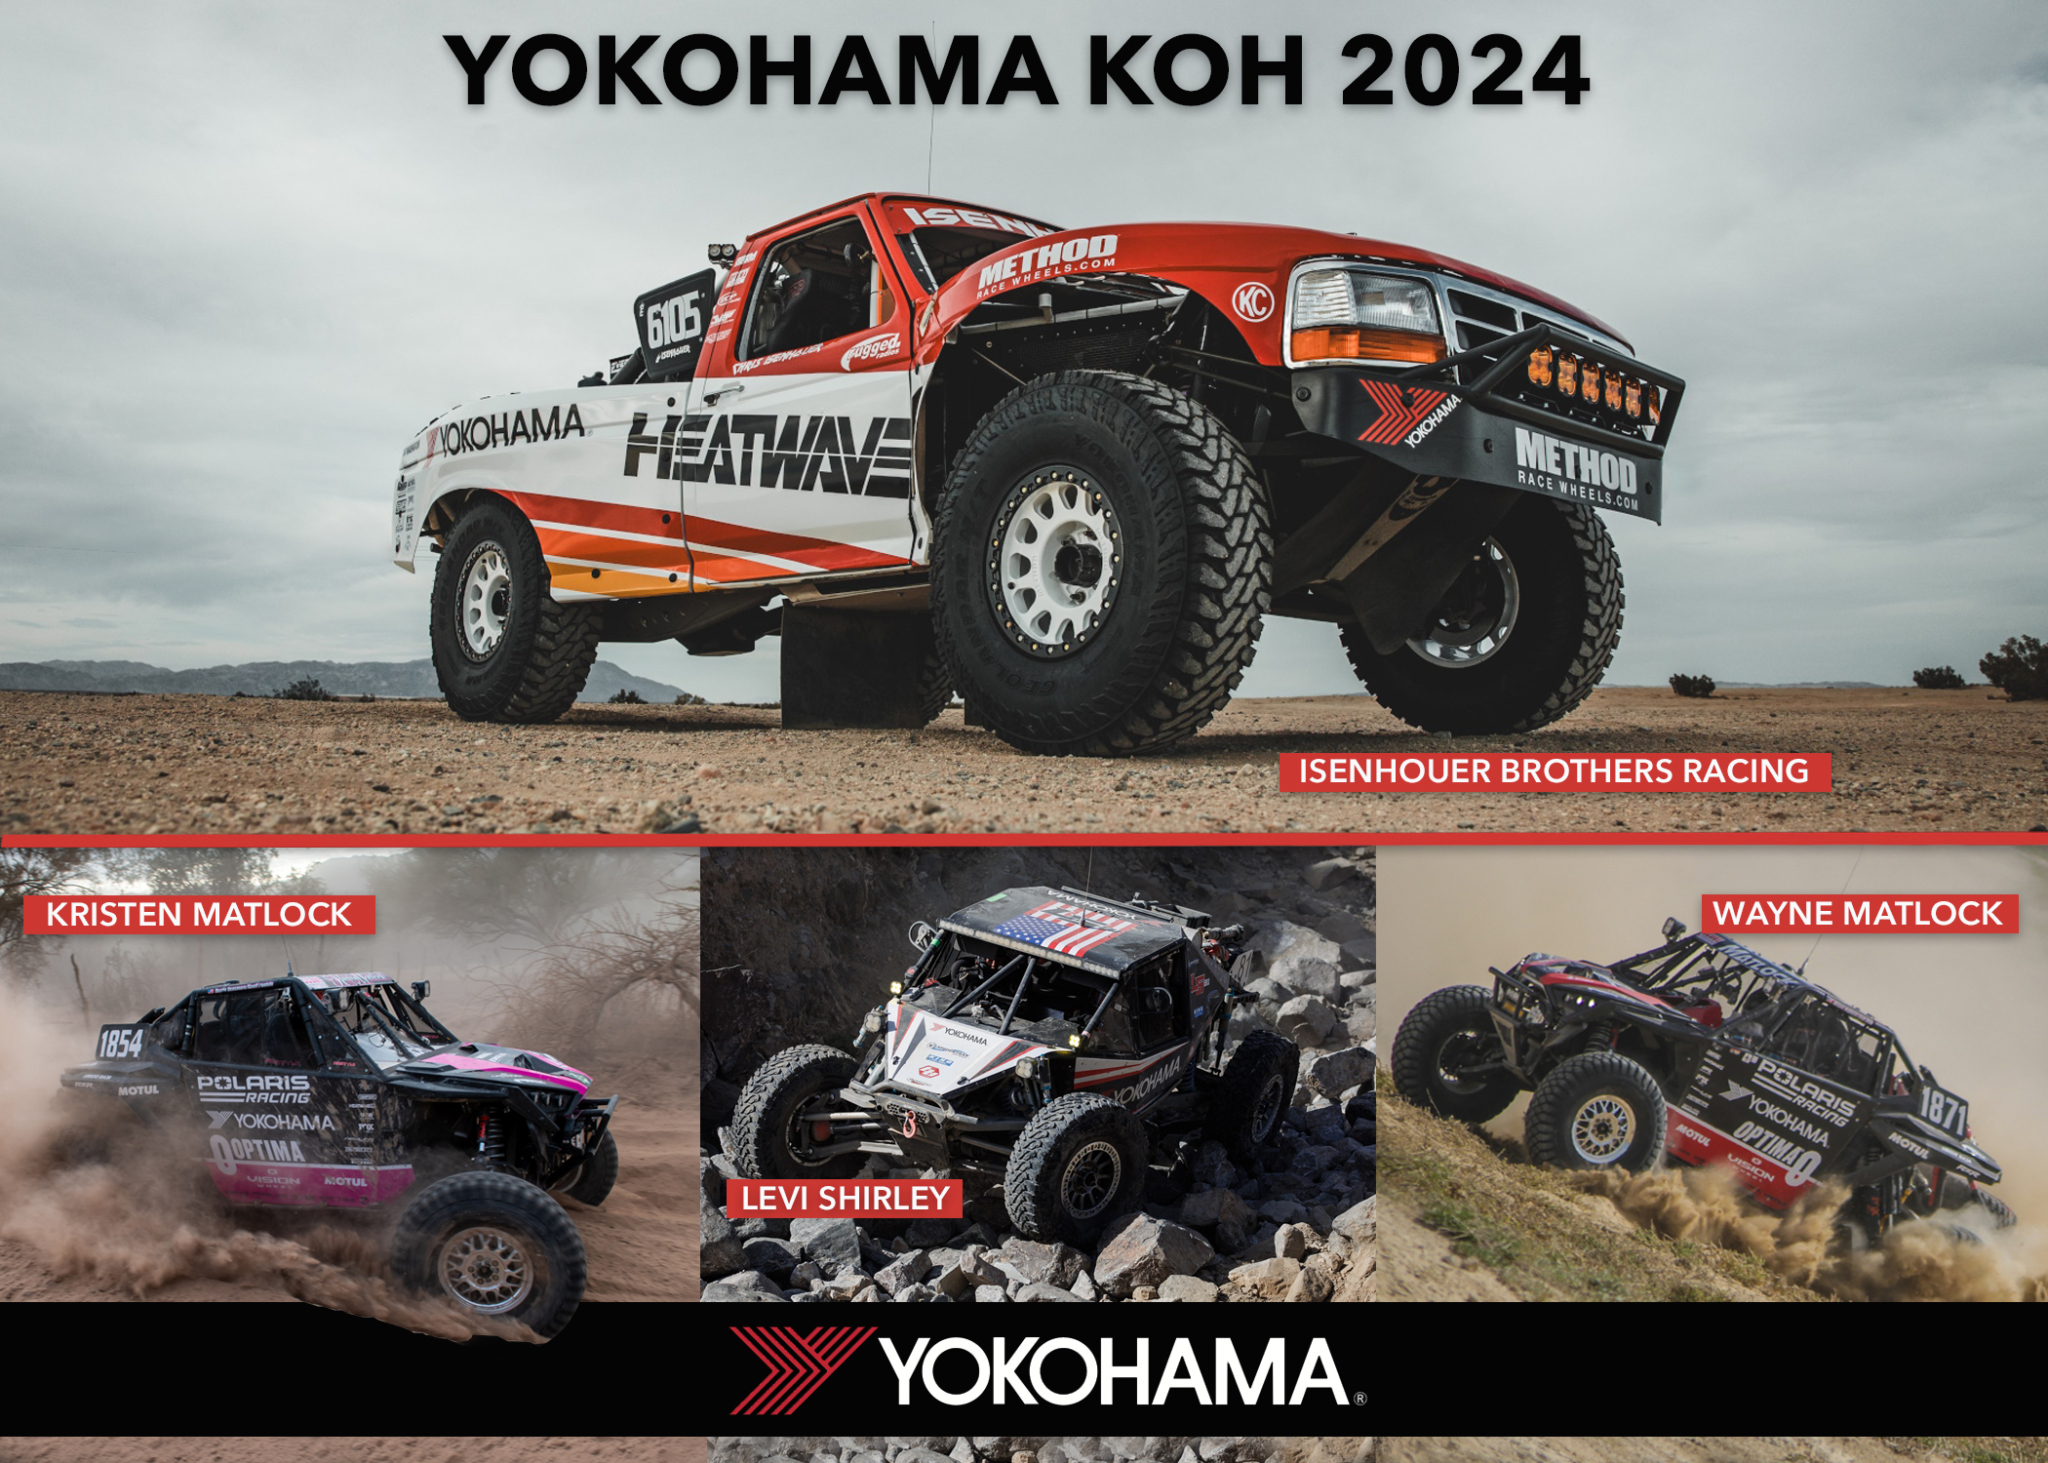 Isenhouer Brothers Racing joins Team Yokohama roster on Geolandar tyres at King of the Hammers